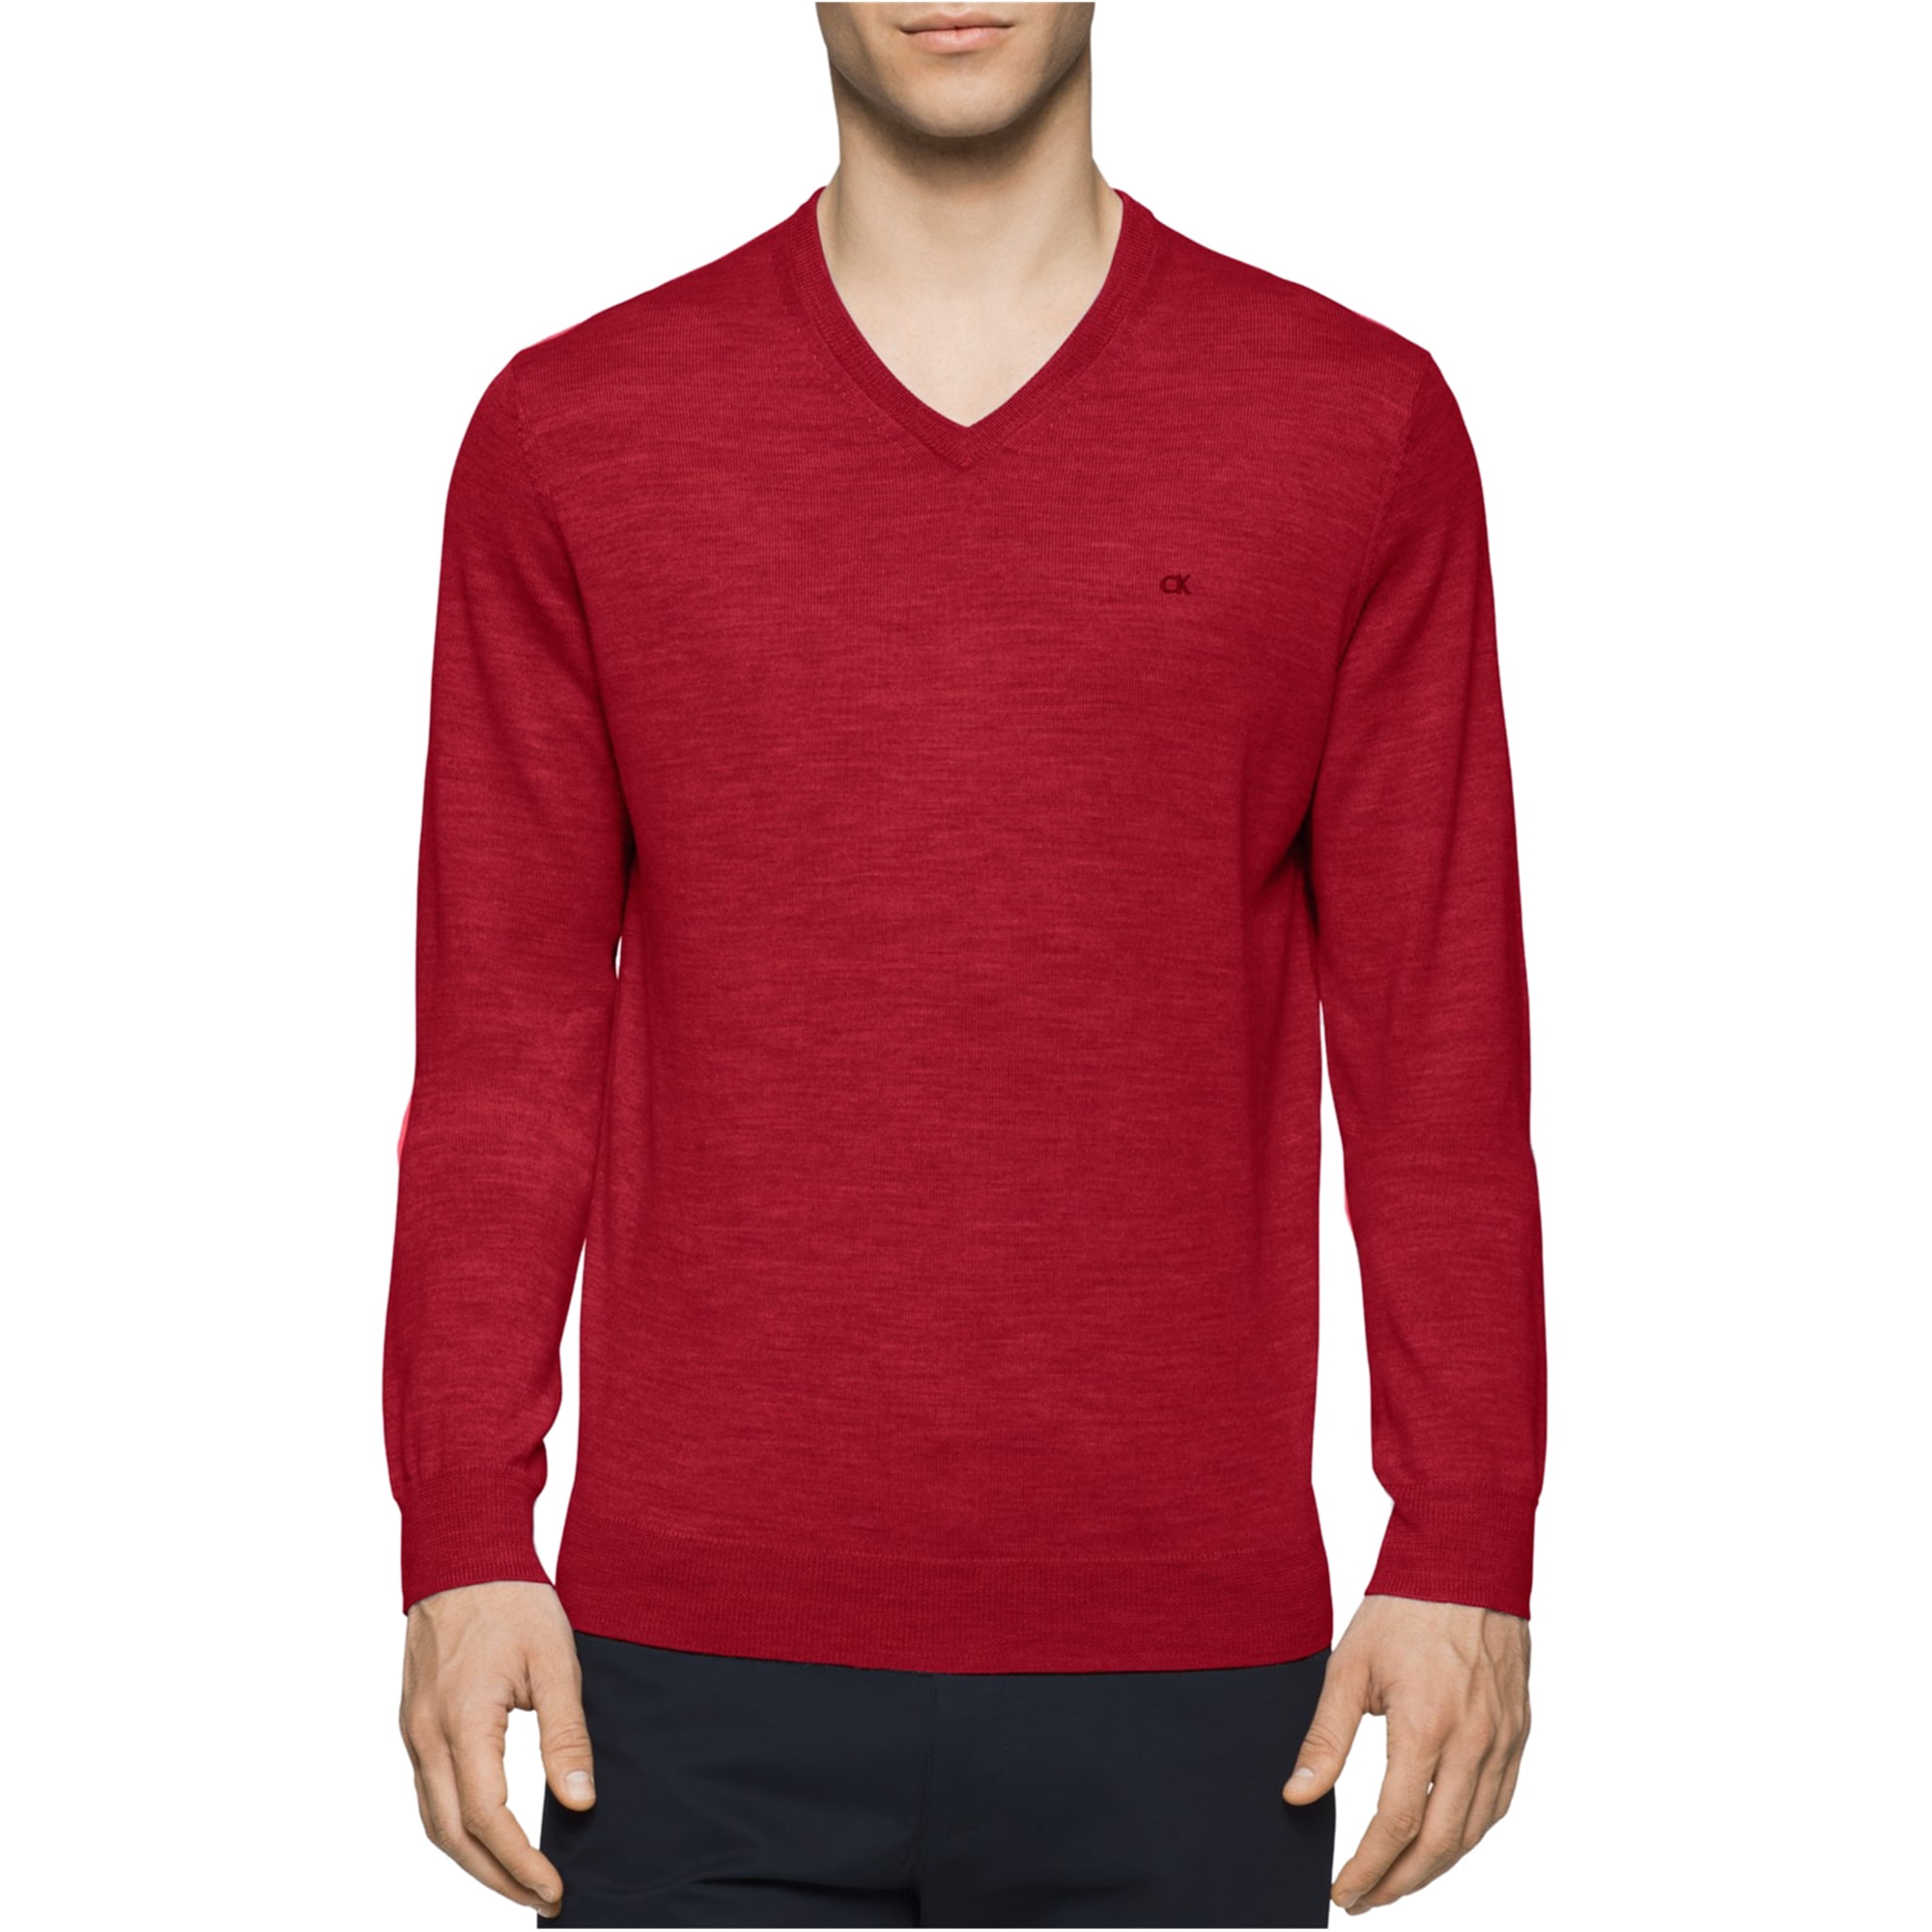 Calvin Klein Mens Knit Pullover Sweater, Red, Small 